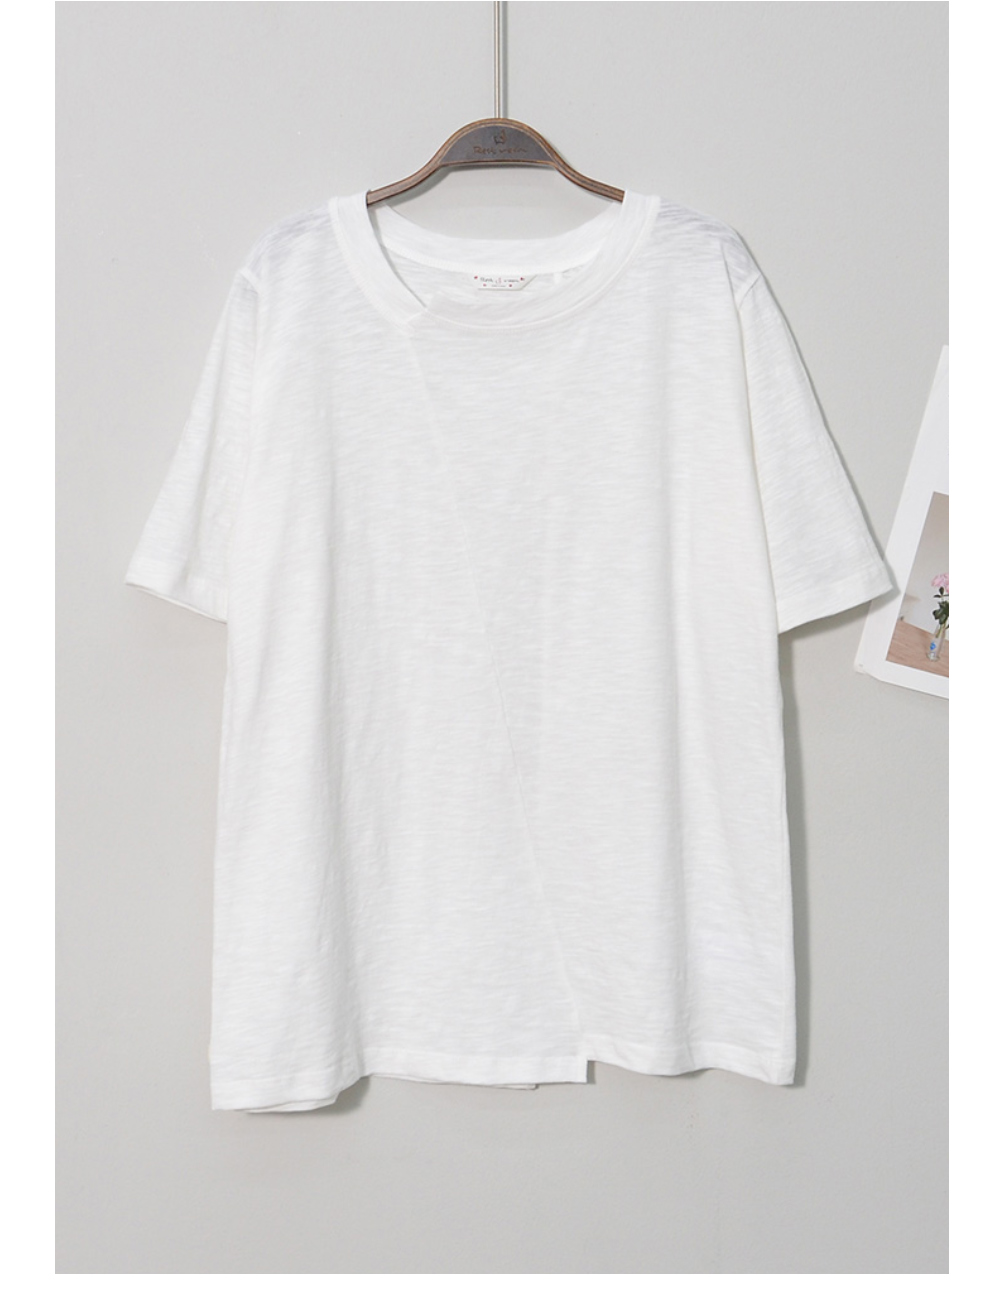 short sleeved tee white color image-S1L39